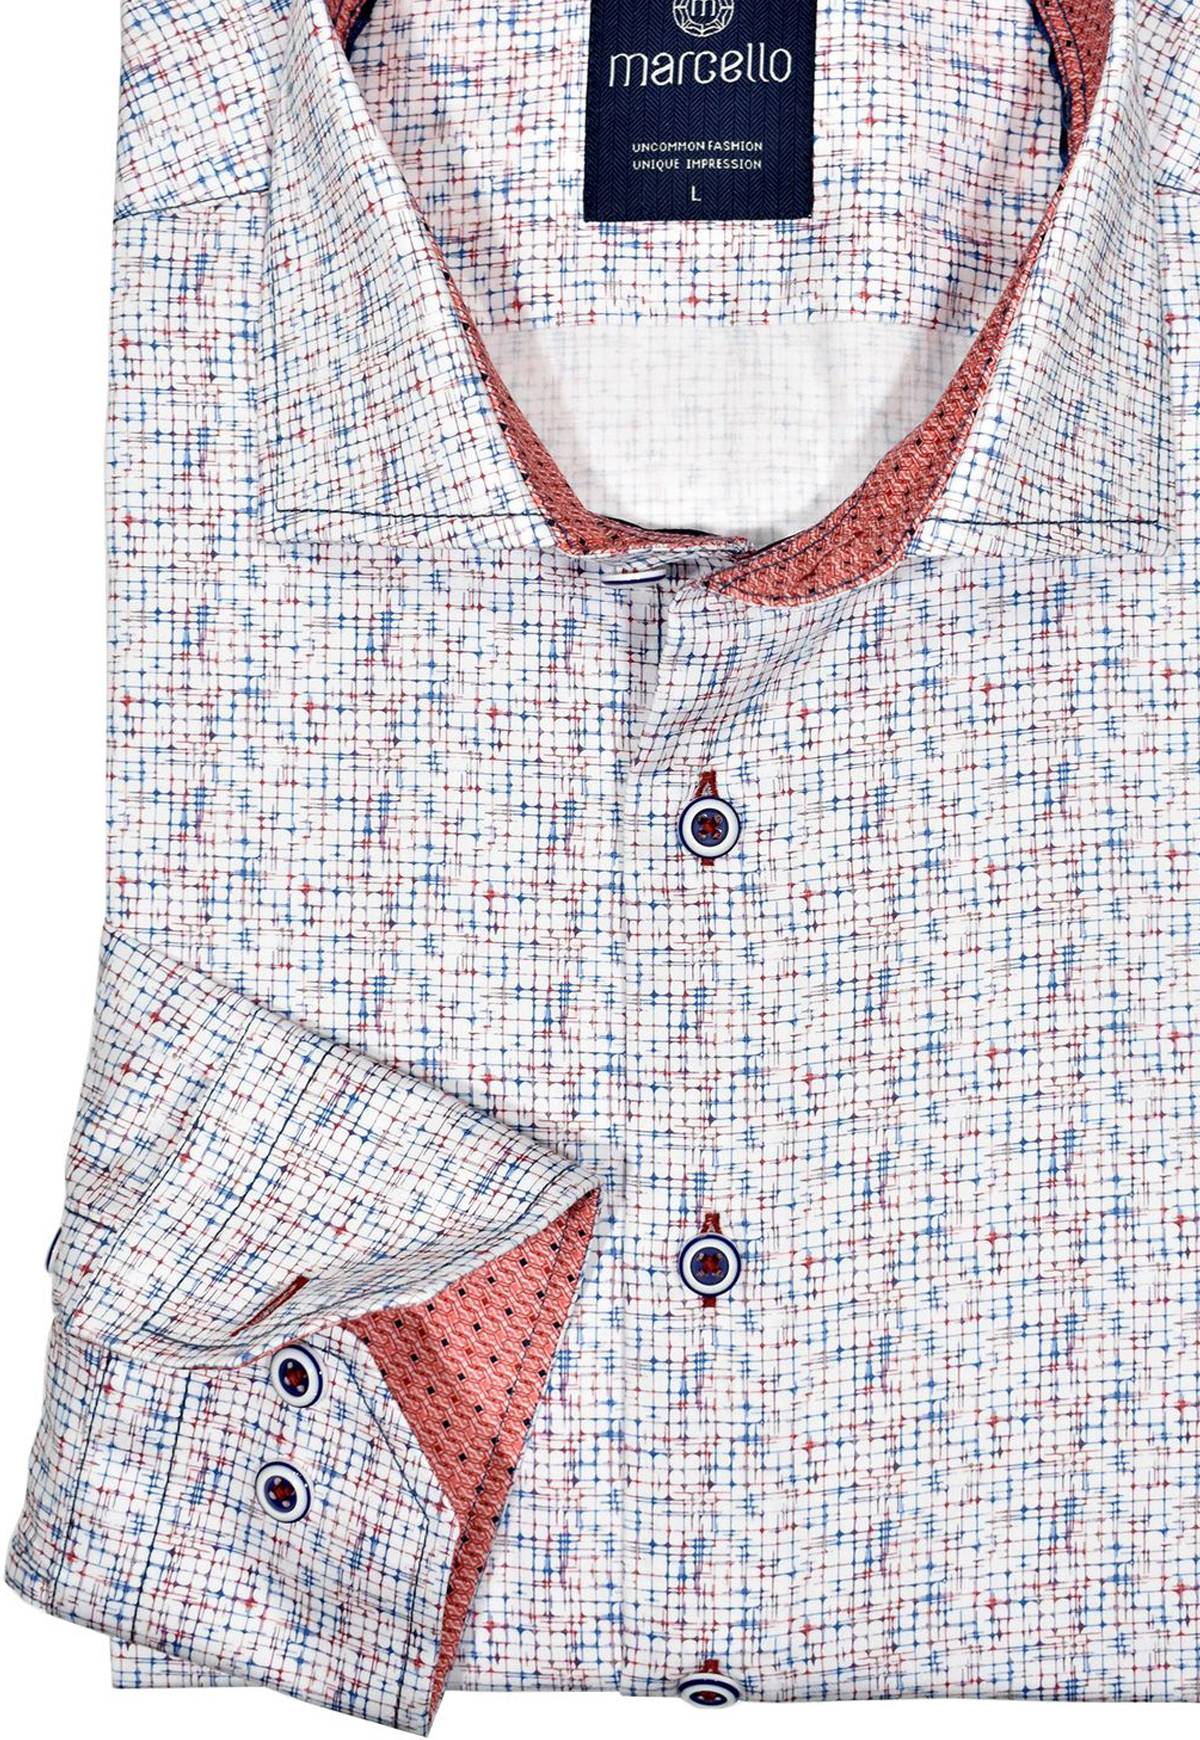 On soft cotton fabric, the abstract red and blue graduated plaid pattern with matched custom buttons and colored accent stitching depicts a cool, casual look.  This shirt is easily paired with different pants, shades of jeans and even shorts.  Matched accent red trim fabric, a medium collar.  Classic shaped fit.